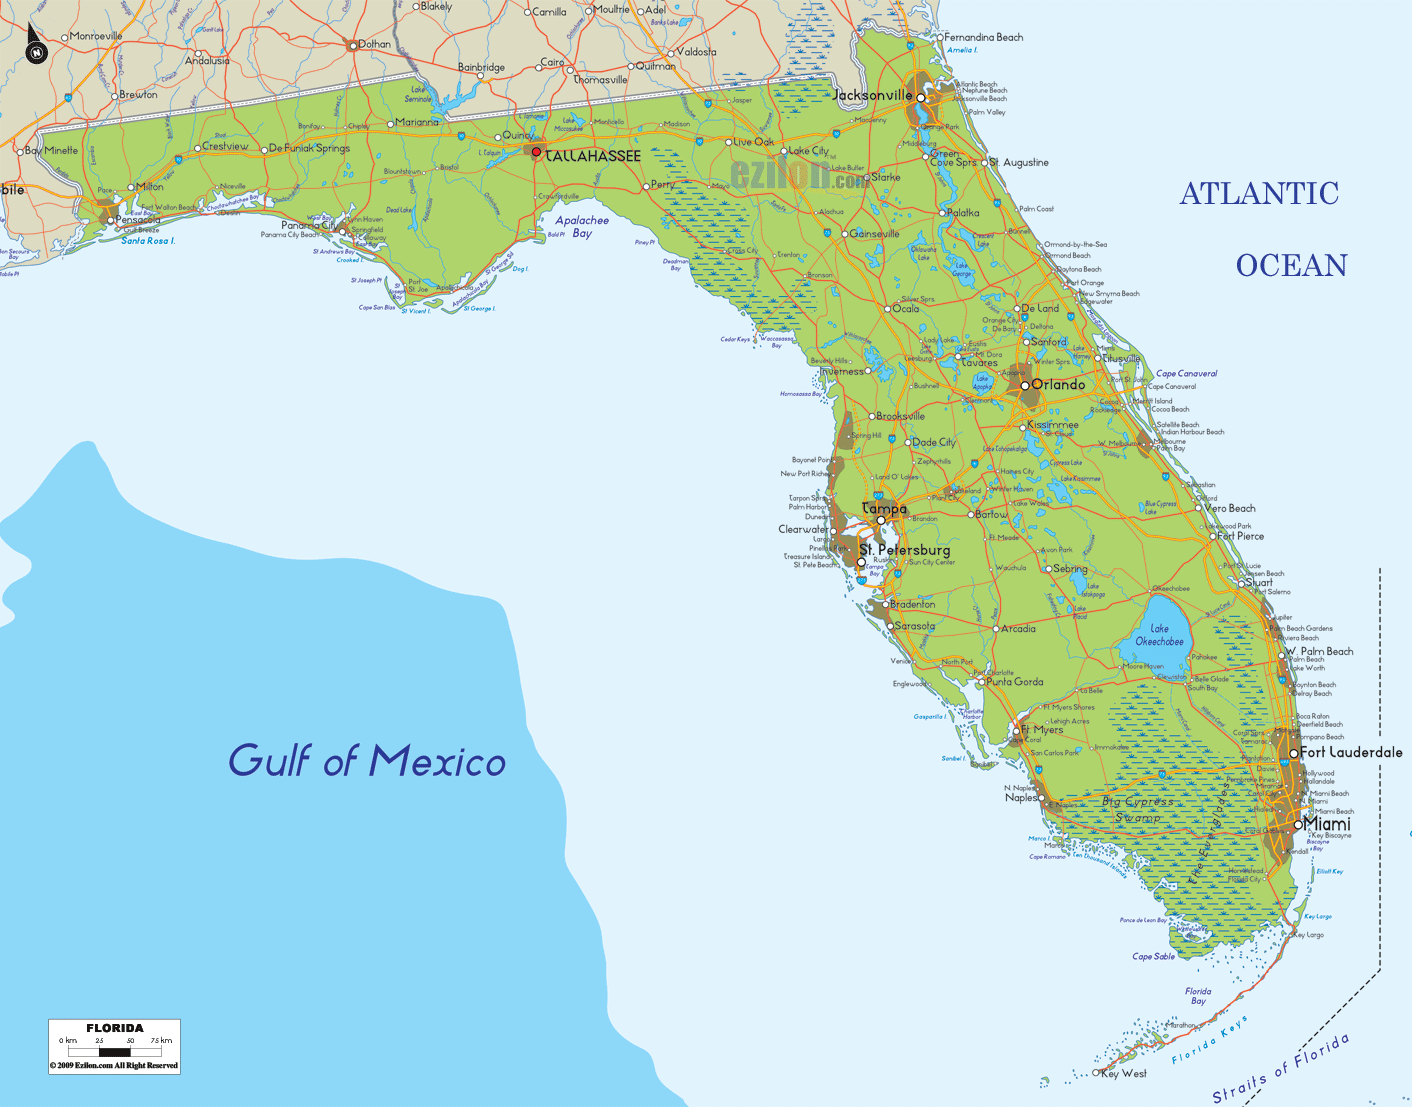 Physical map of Florida State USA showing major geographical features such as rivers, lakes, borders with atlantic ocean, gulf of Mexico and other topography or land formations.